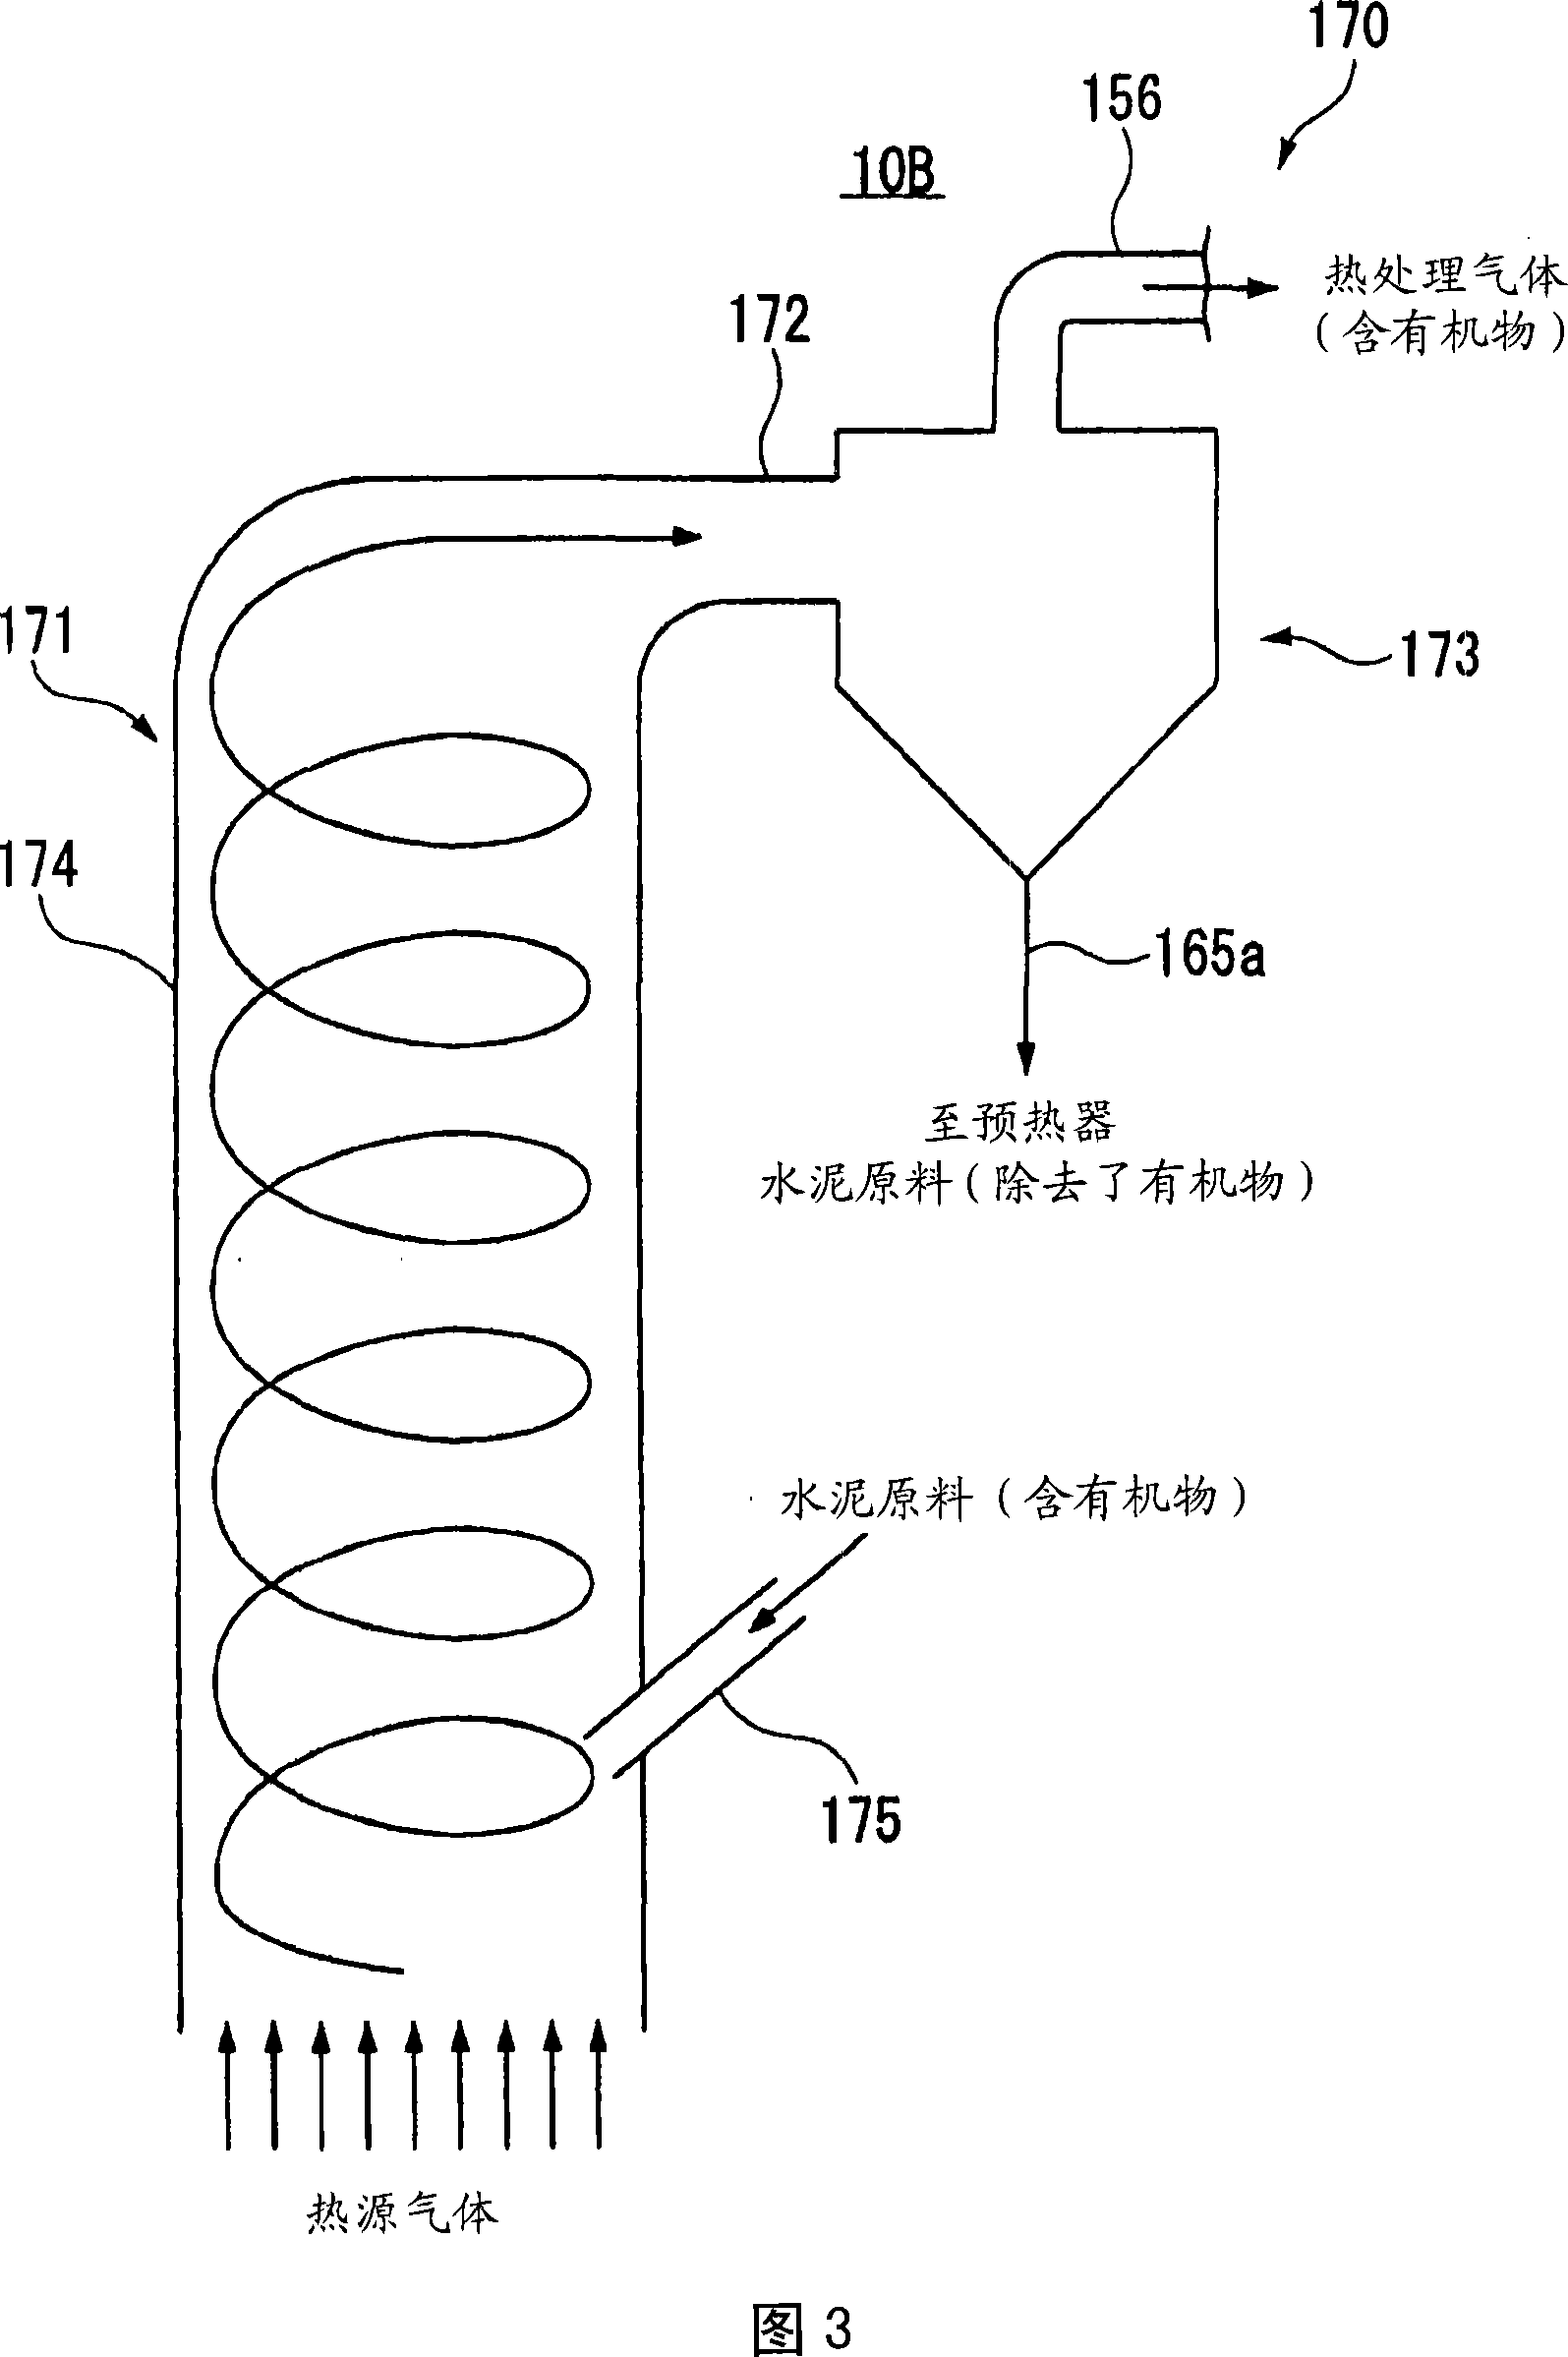 Method for reduction of organic chlorinated compound in cement manufacture plant, and cement manufacture plant